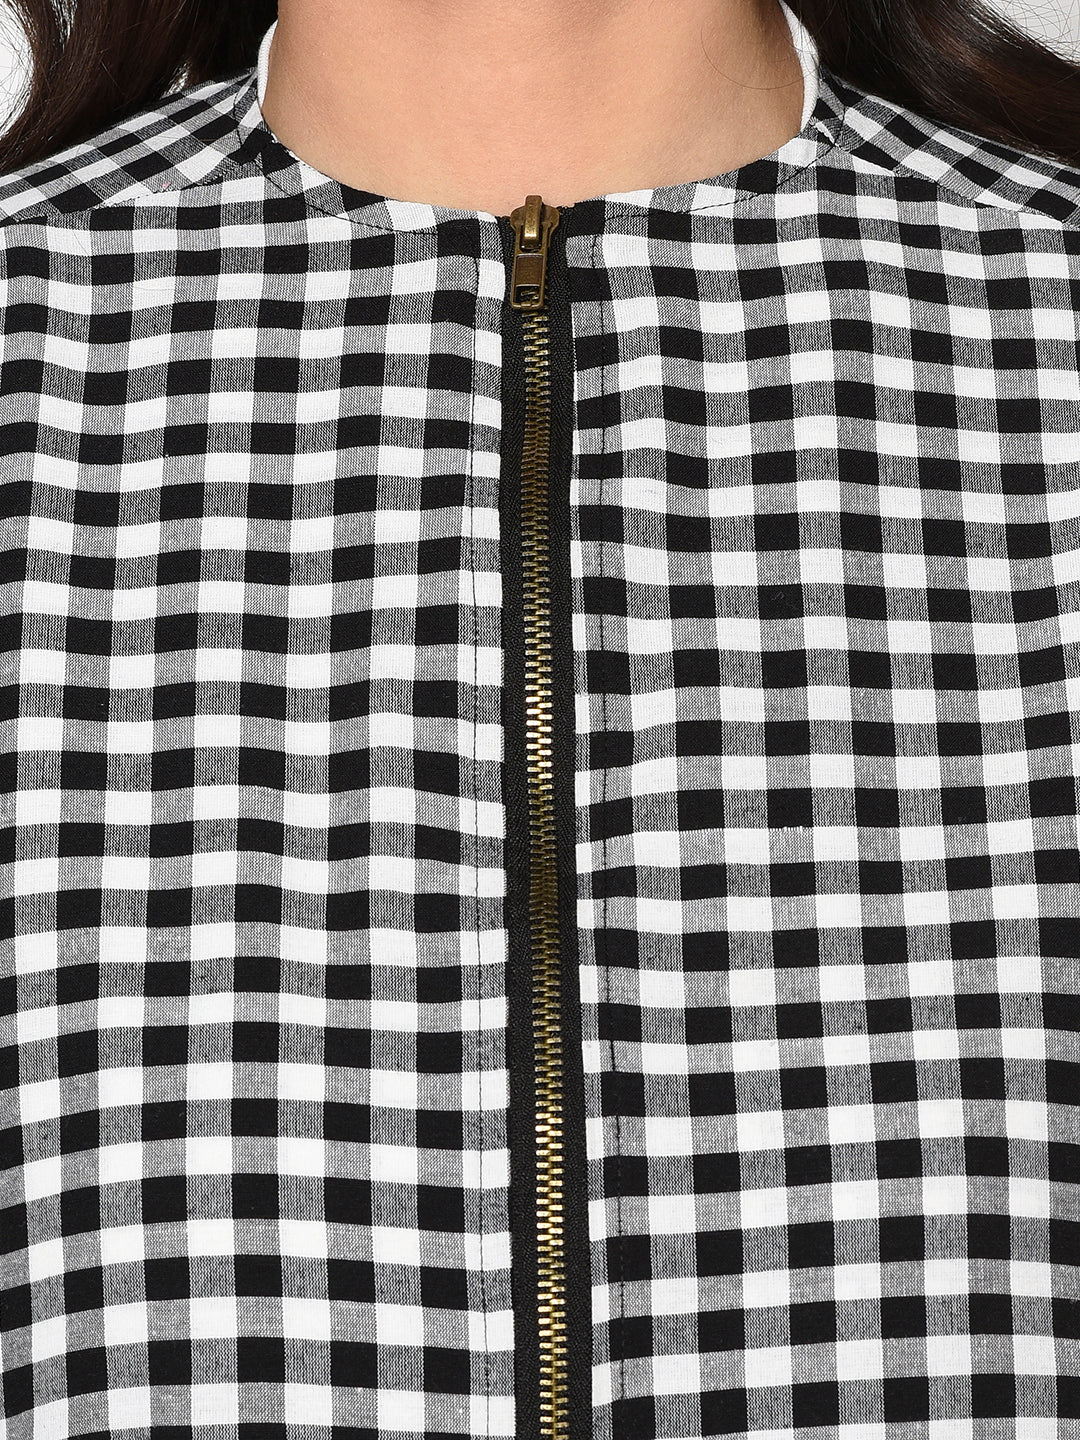 Black And White Check Double Layered Jacket